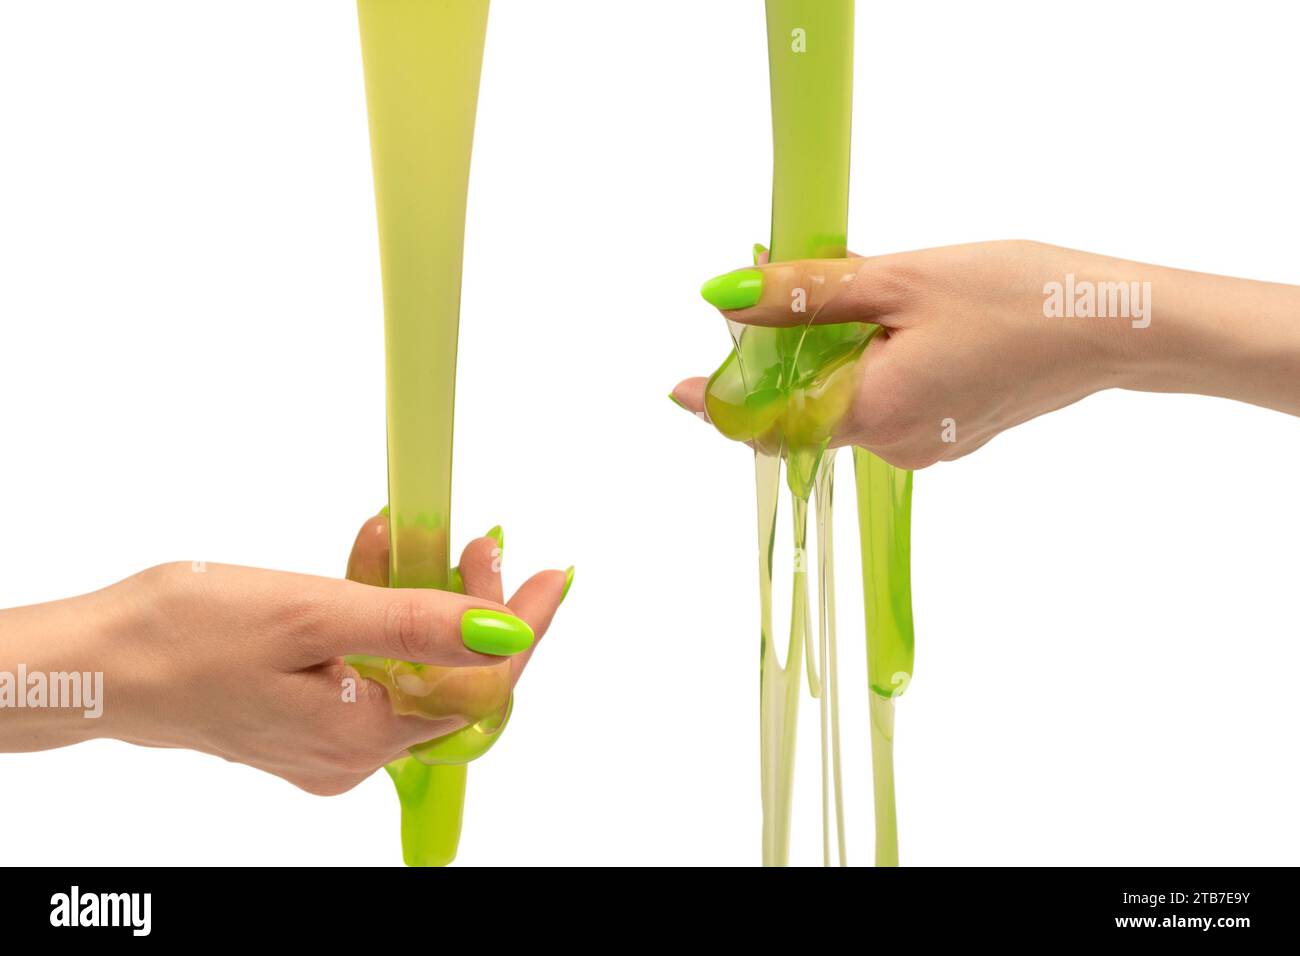 Green slime toy in woman hand with green nails isolated on a white background. Stock Photo